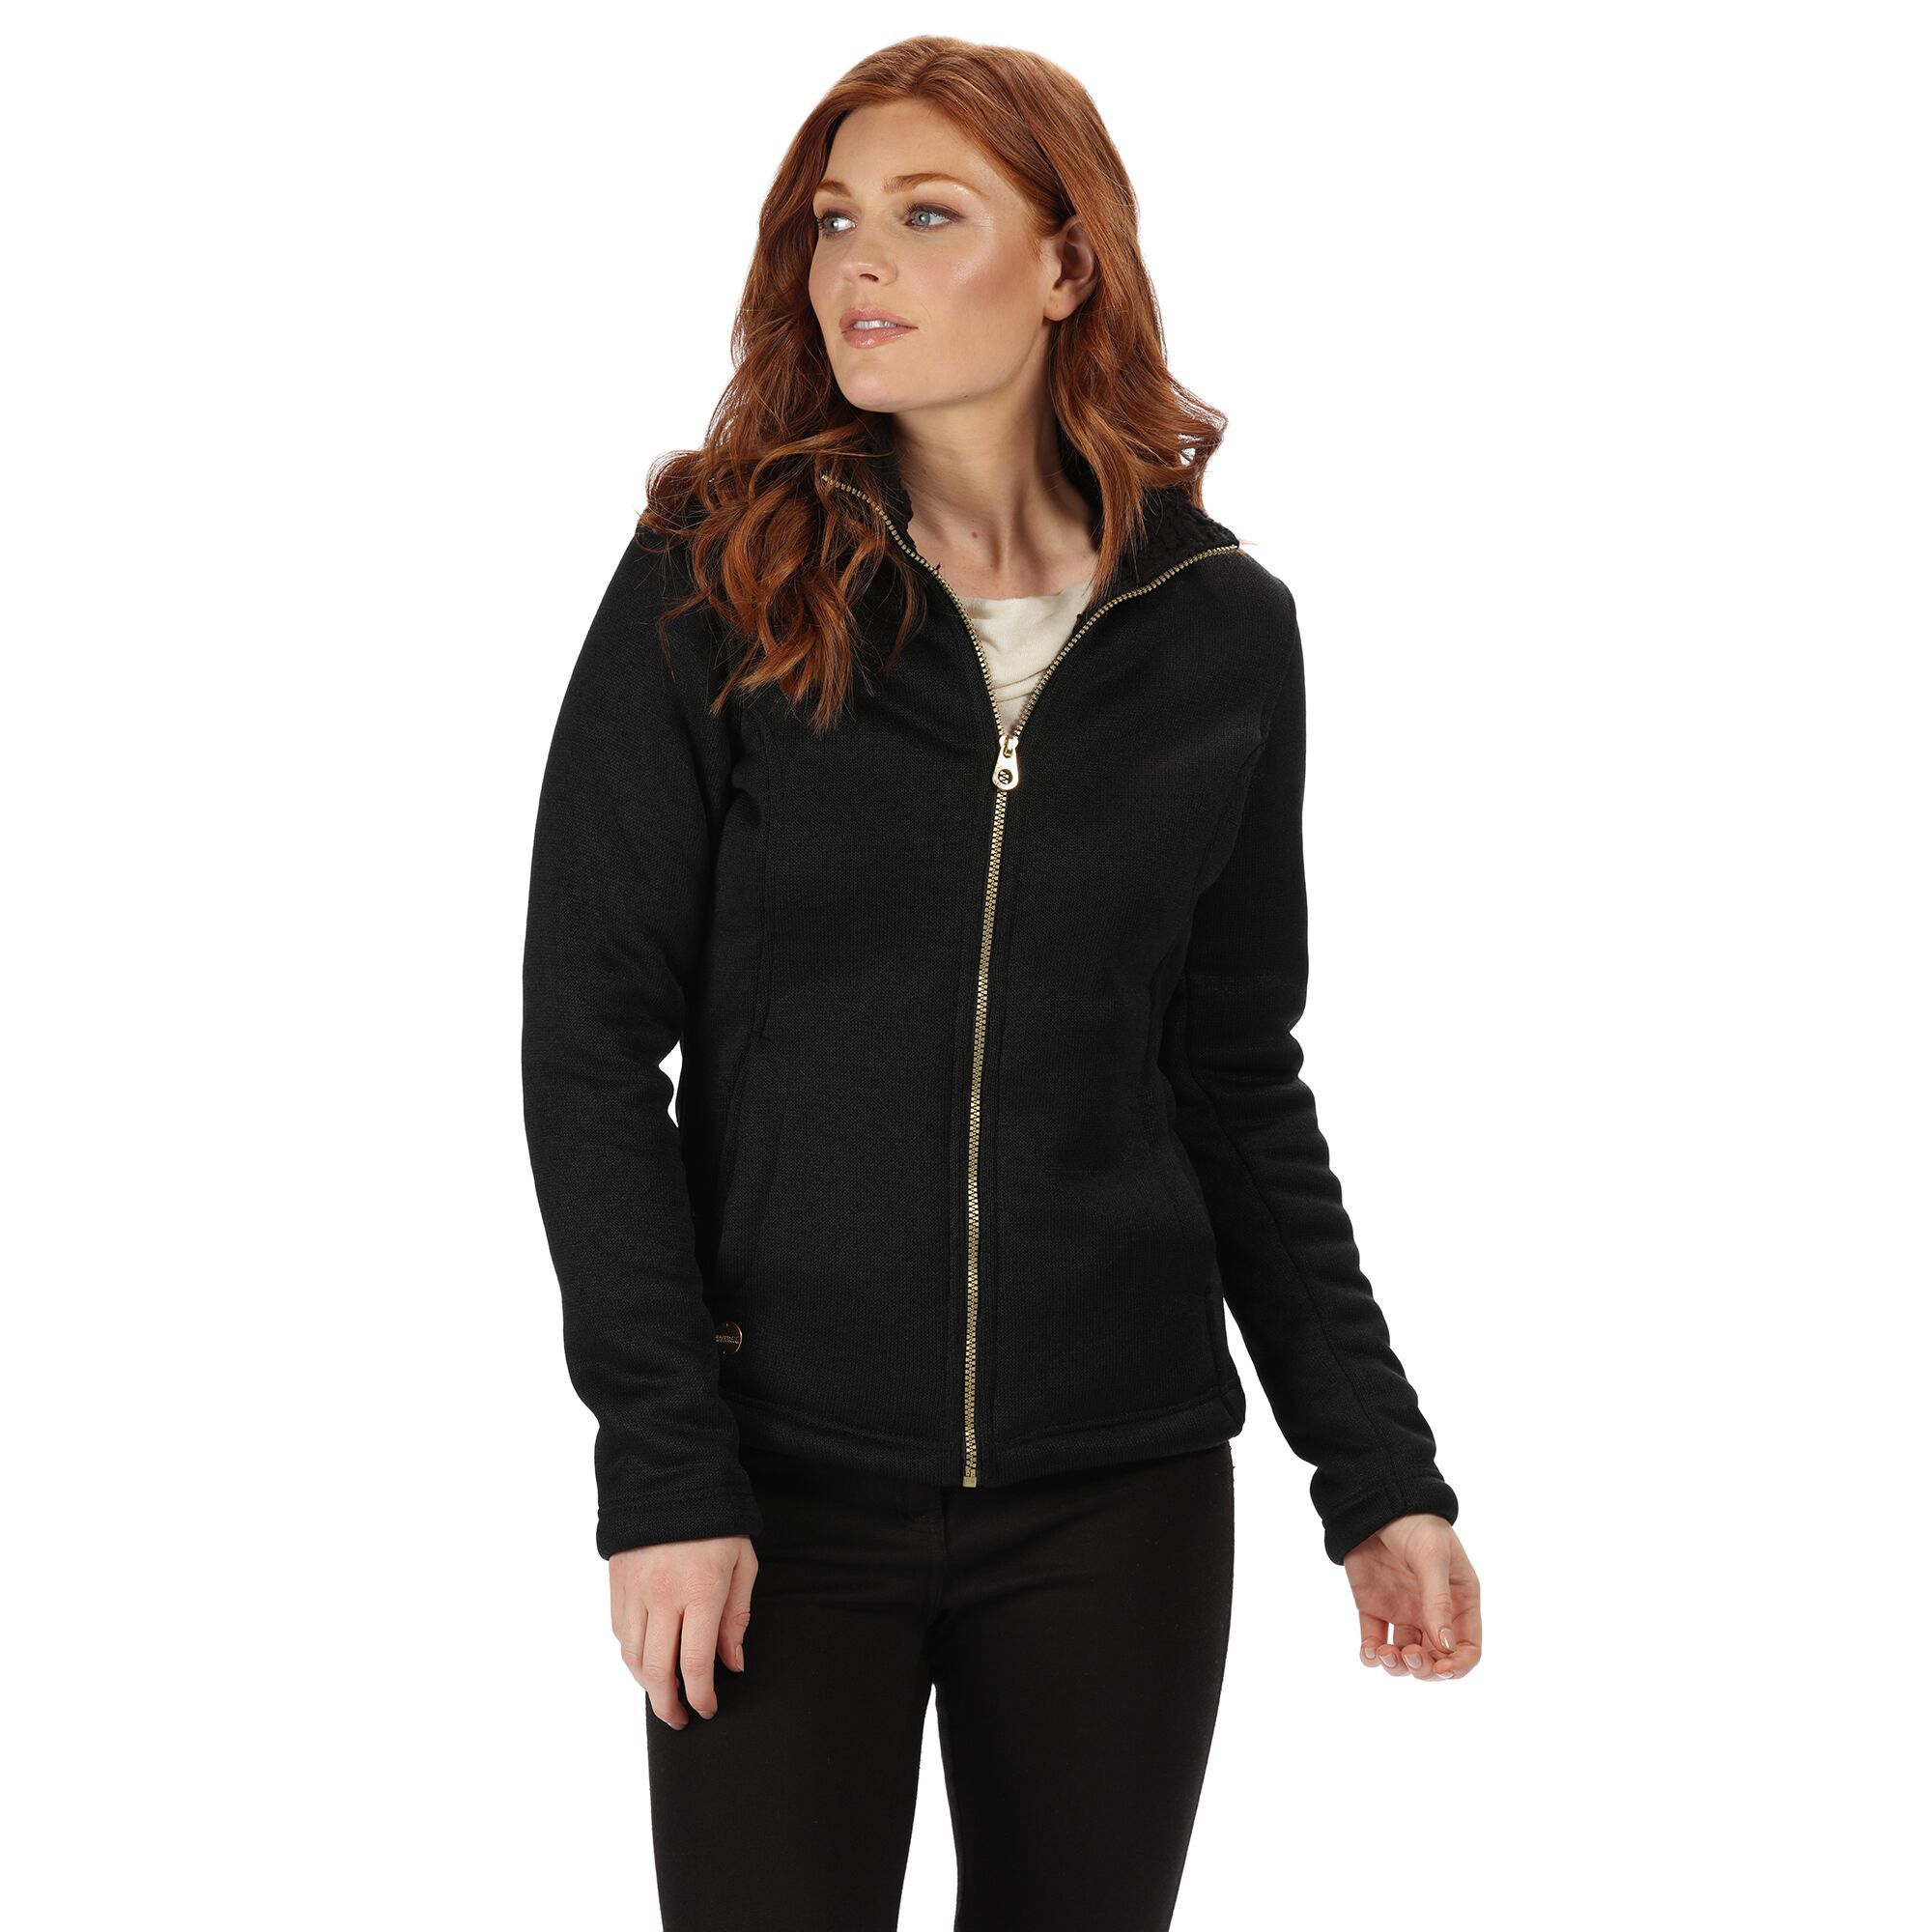 Womens full zip fleece made of 430gsm Polyester knit effect hi pile bonded material. 2 zipped lower pockets. Ideal for wearing outdoors on a cold day. 100% Polyester.